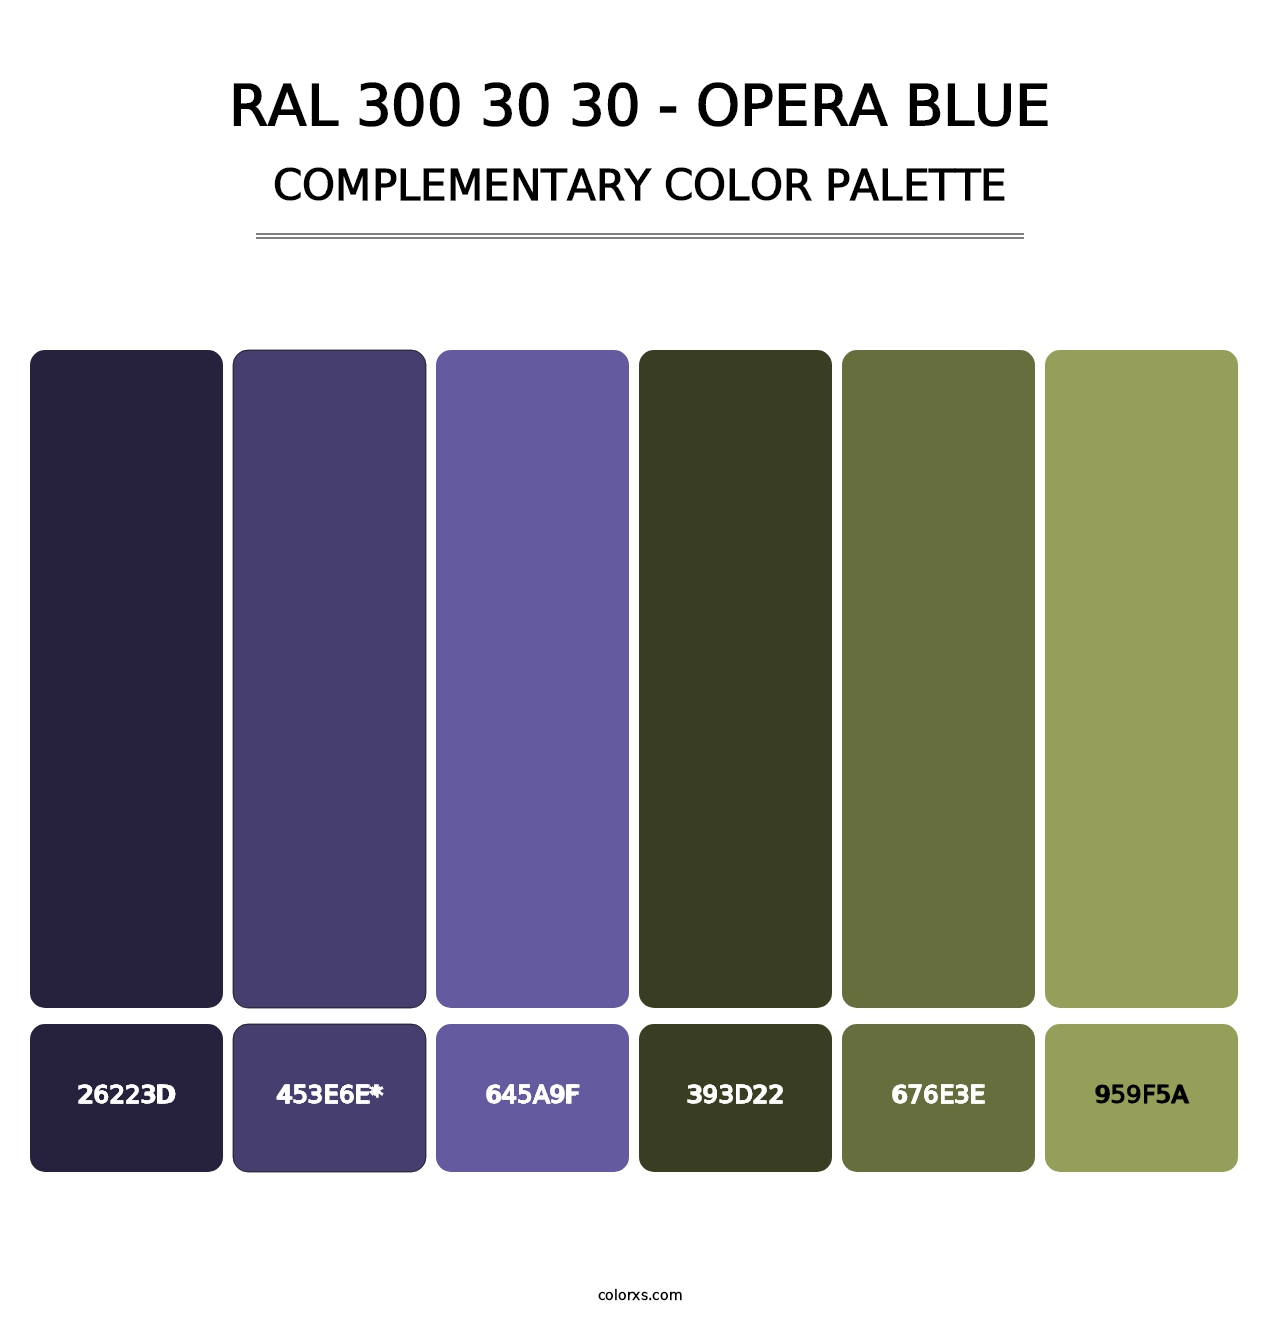 RAL 300 30 30 - Opera Blue - Complementary Color Palette